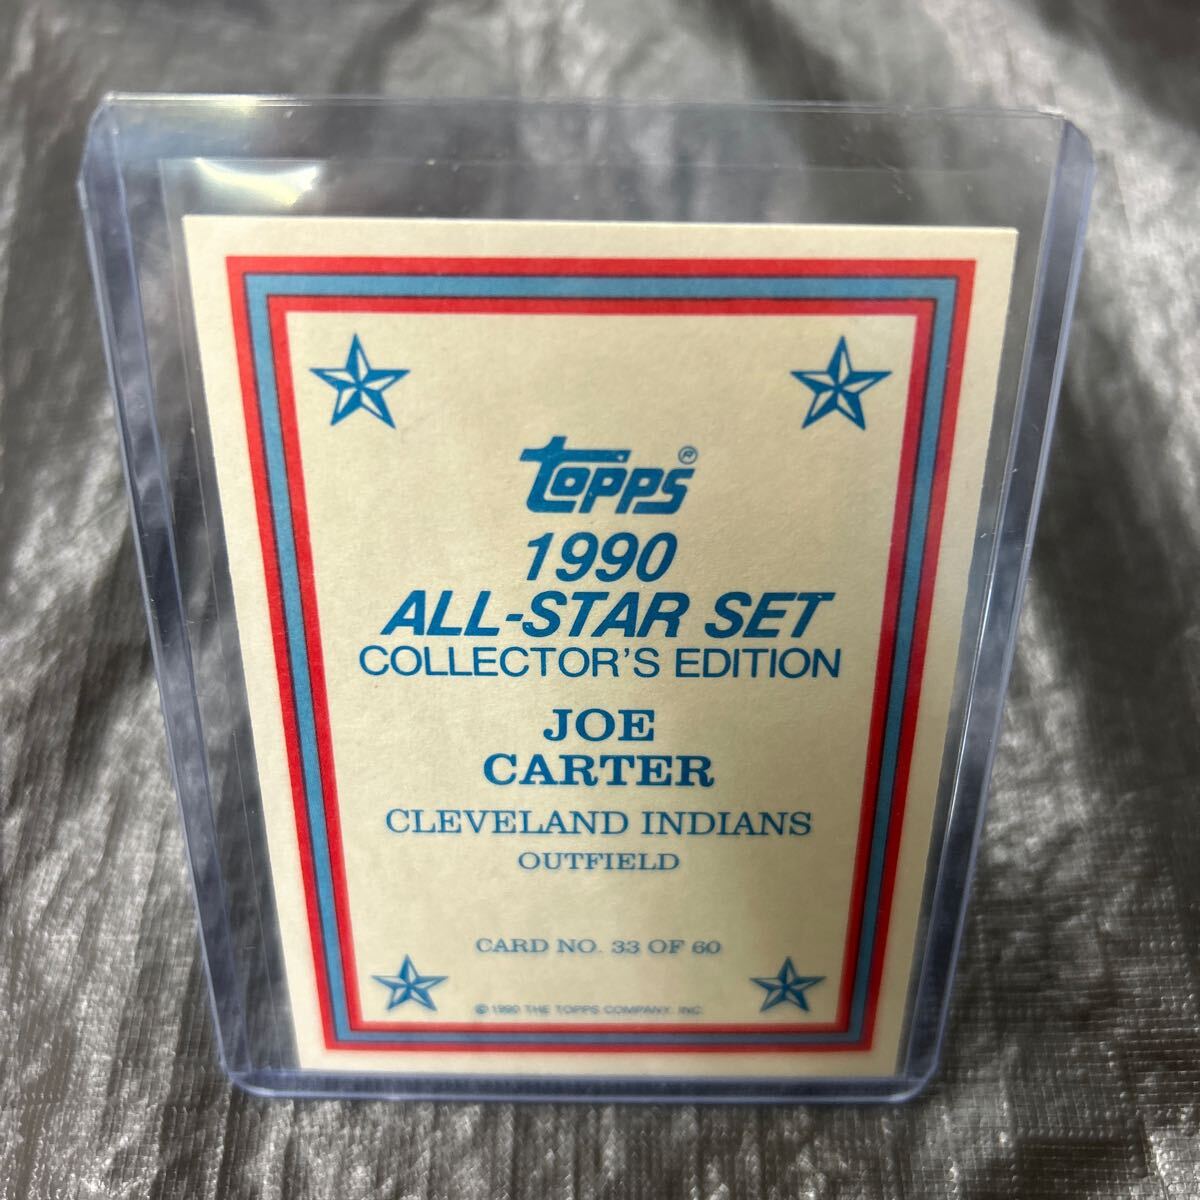 1990 Topps All Star Set Collector’s Edition Joe Carter Cleveland Indians No.33 of 60_画像2